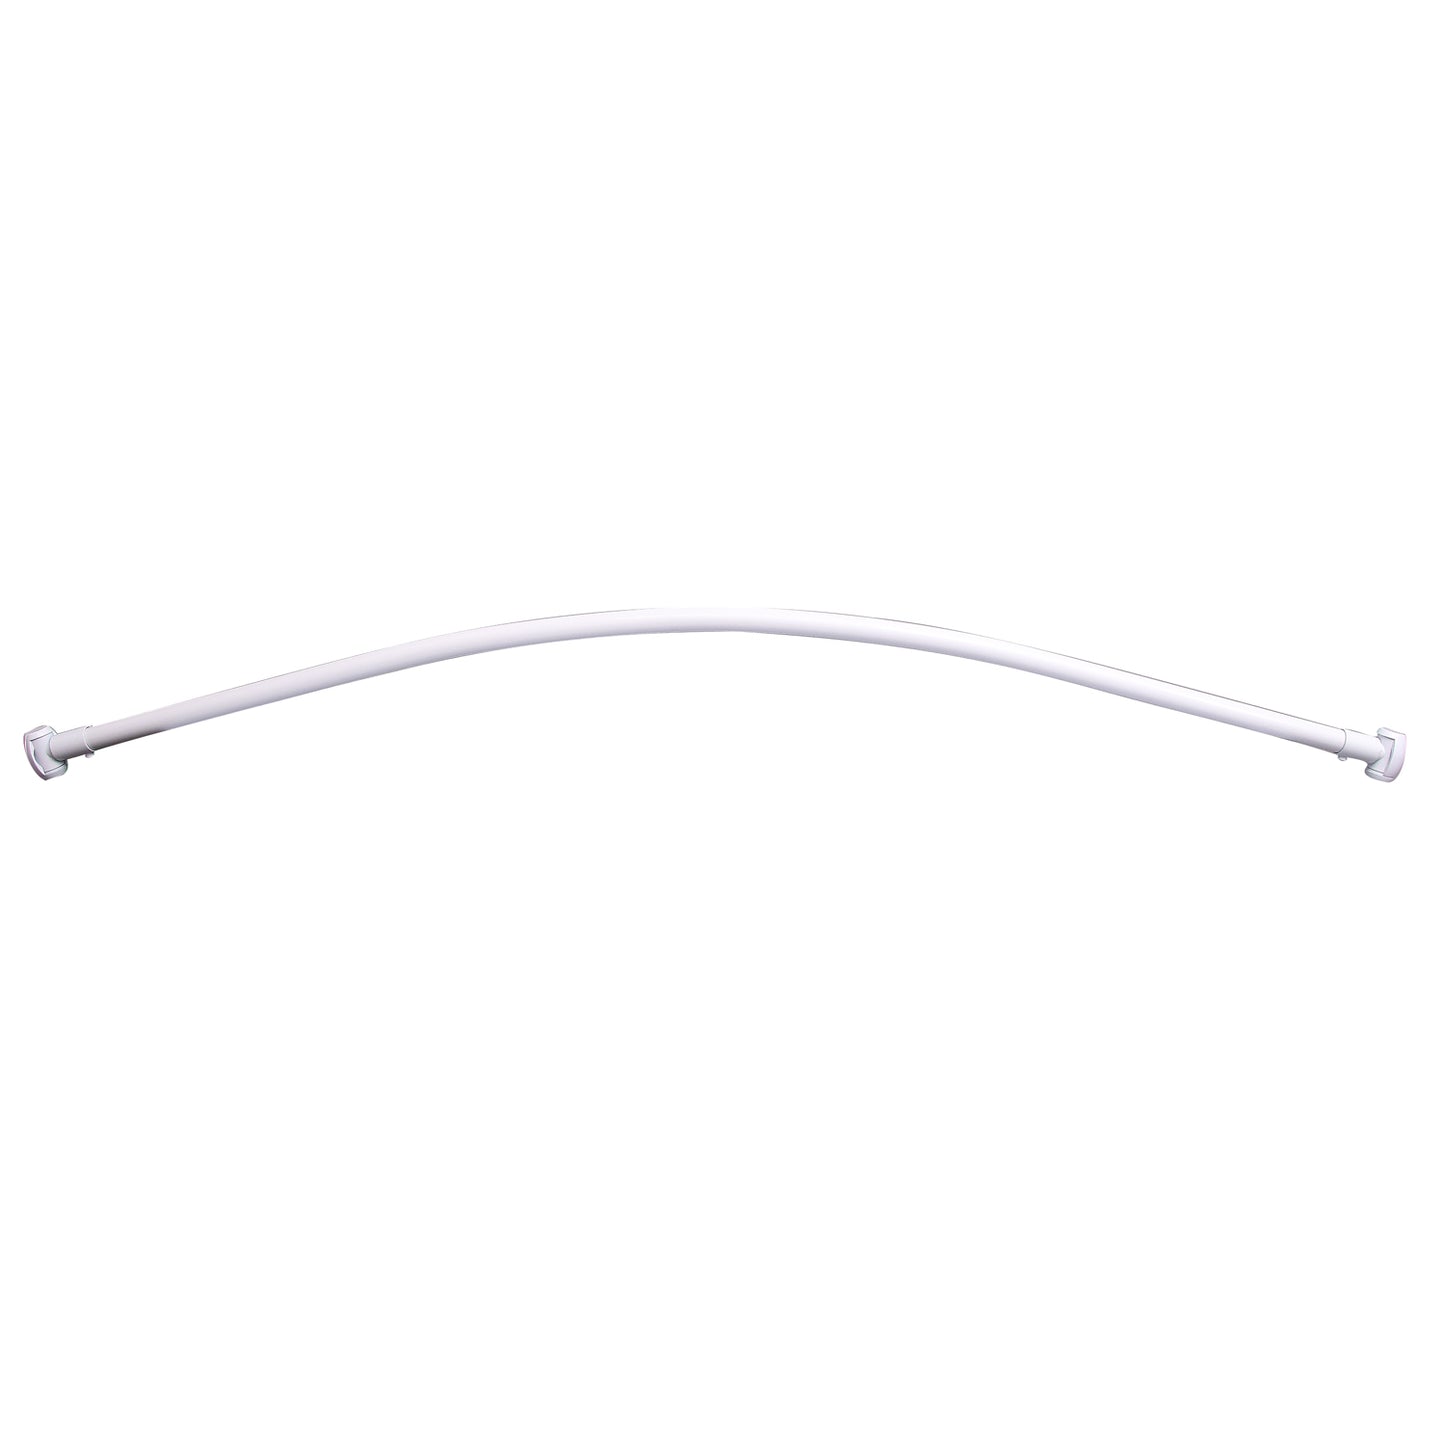 Curved 60" Shower Rod w/Flange in White